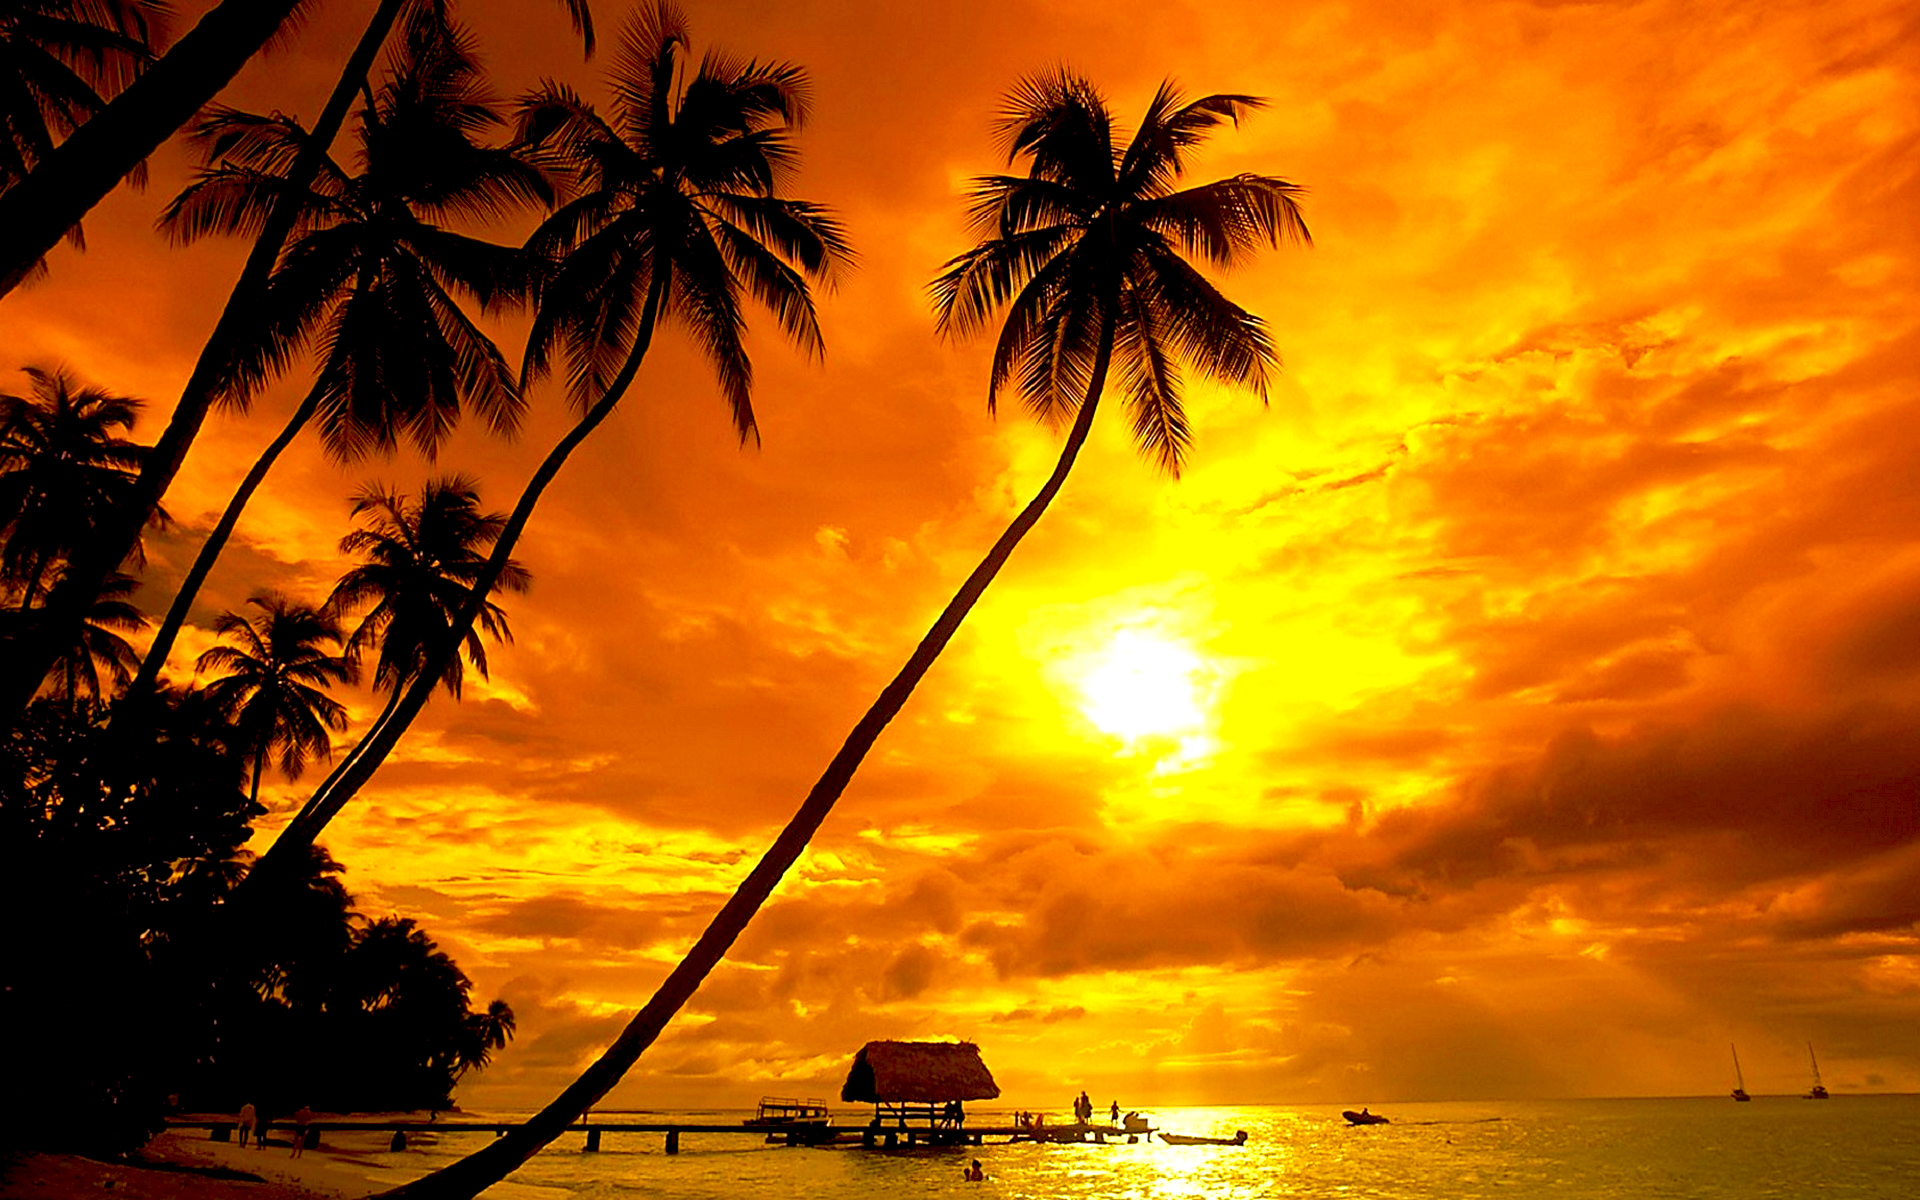 sunset, silhouettes, tropical, palm trees, huts - desktop wallpaper